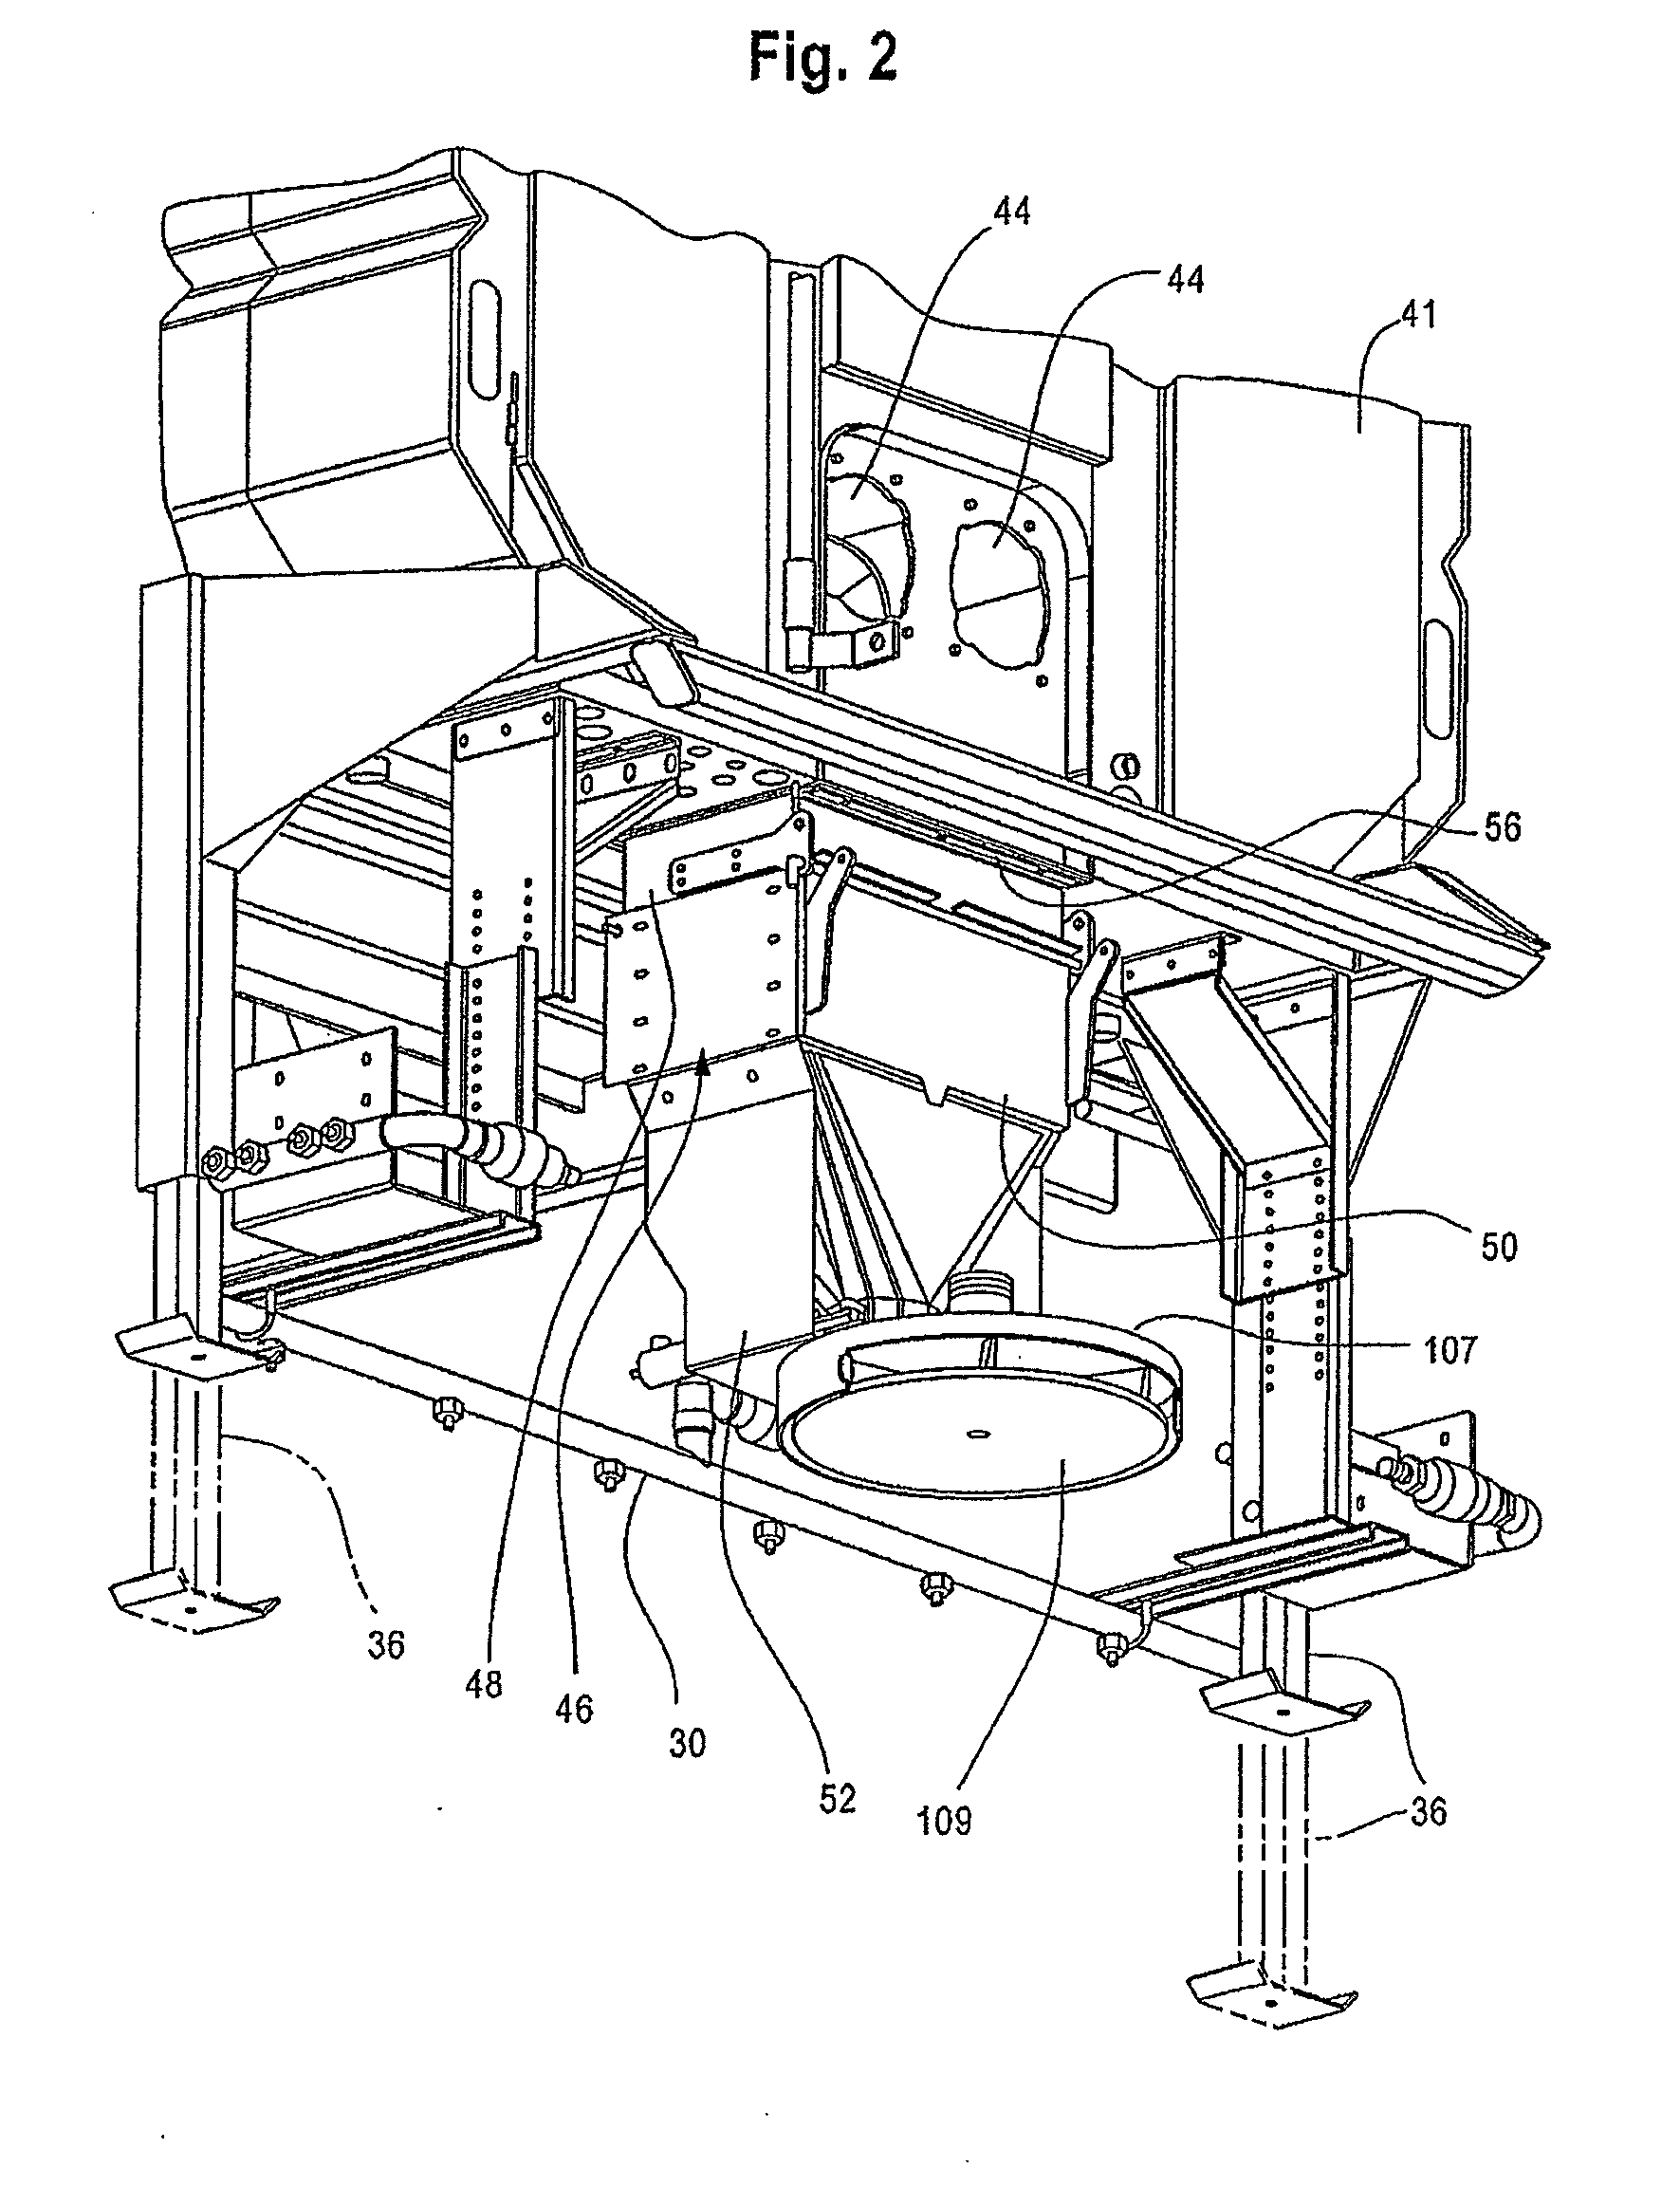 Apparatus for spreading granular materials from vehicle